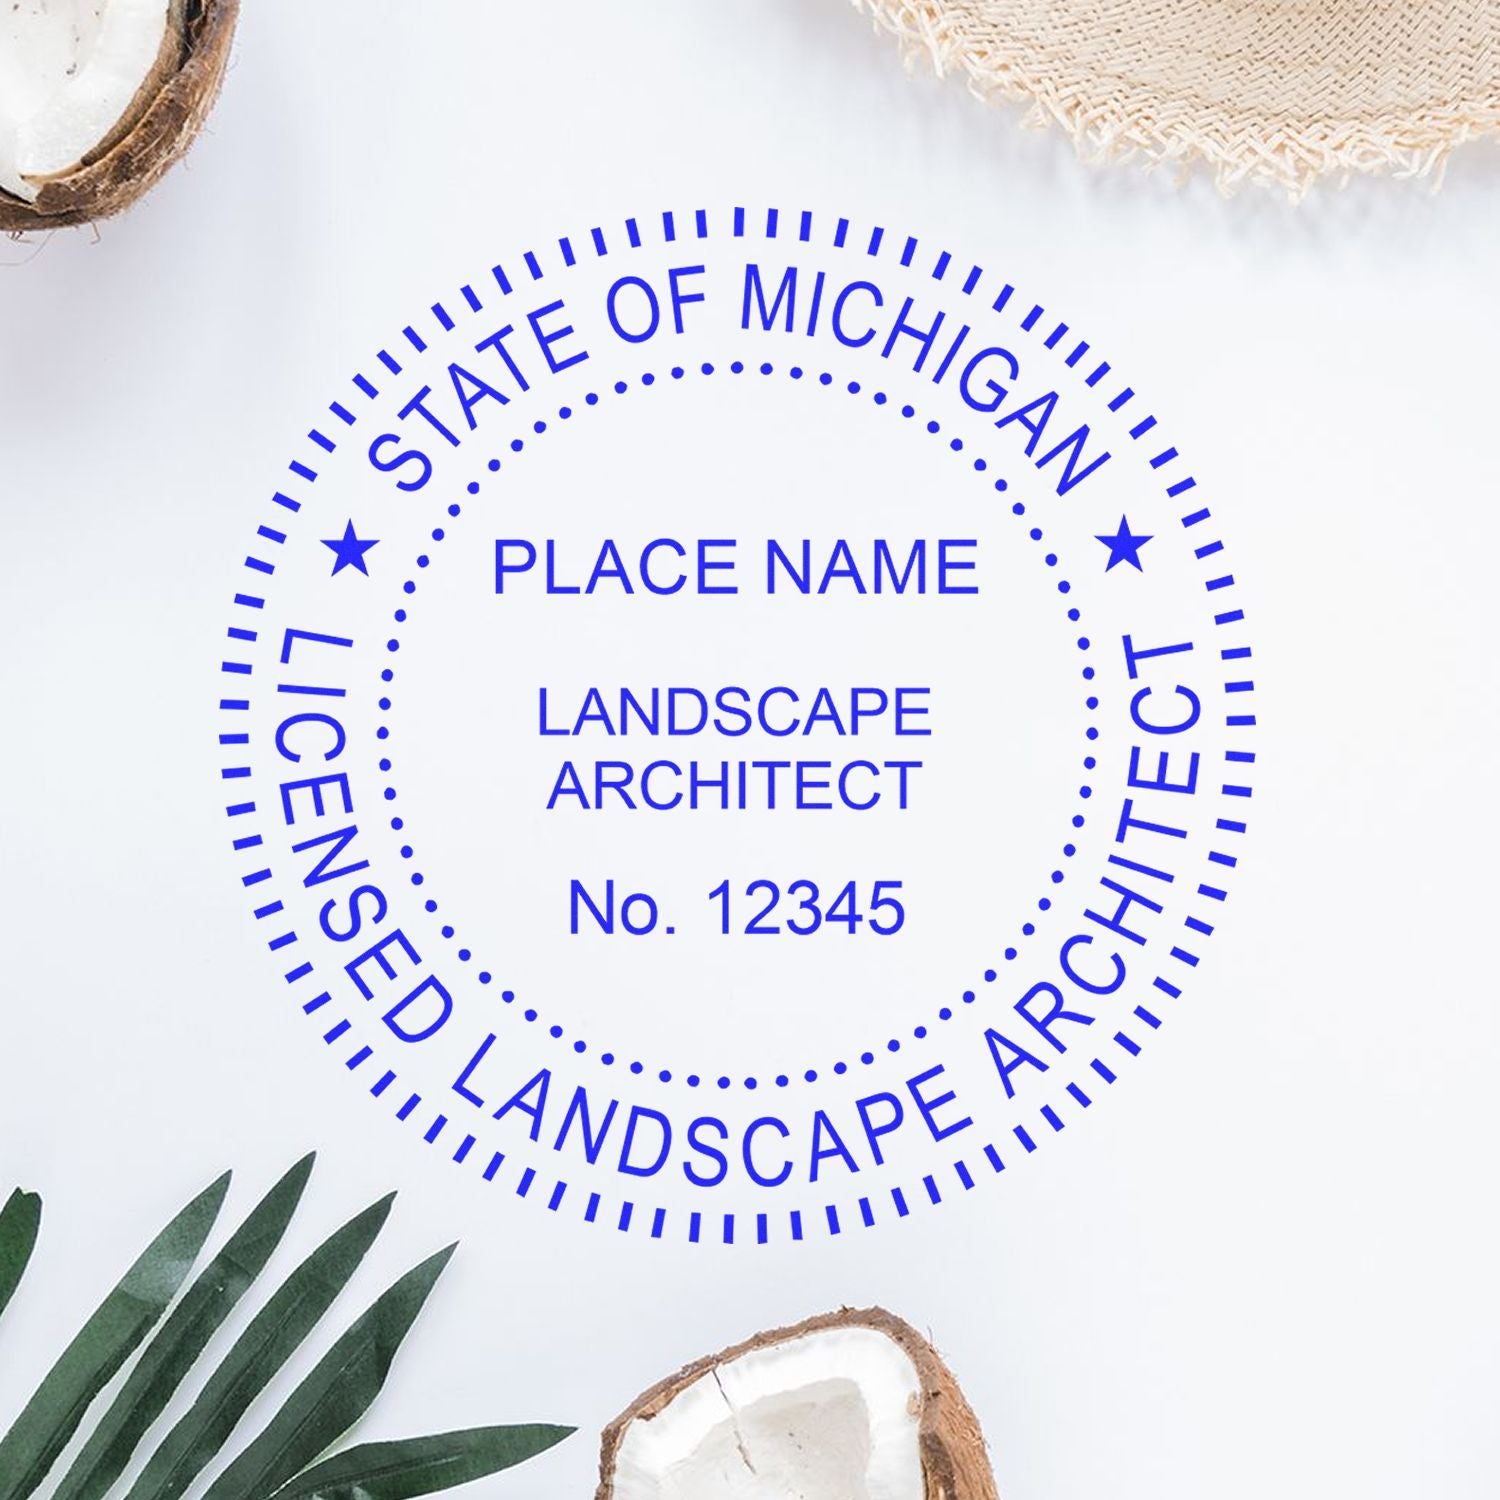 Michigan Landscape Architectural Seal Stamp in use photo showing a stamped imprint of the Michigan Landscape Architectural Seal Stamp